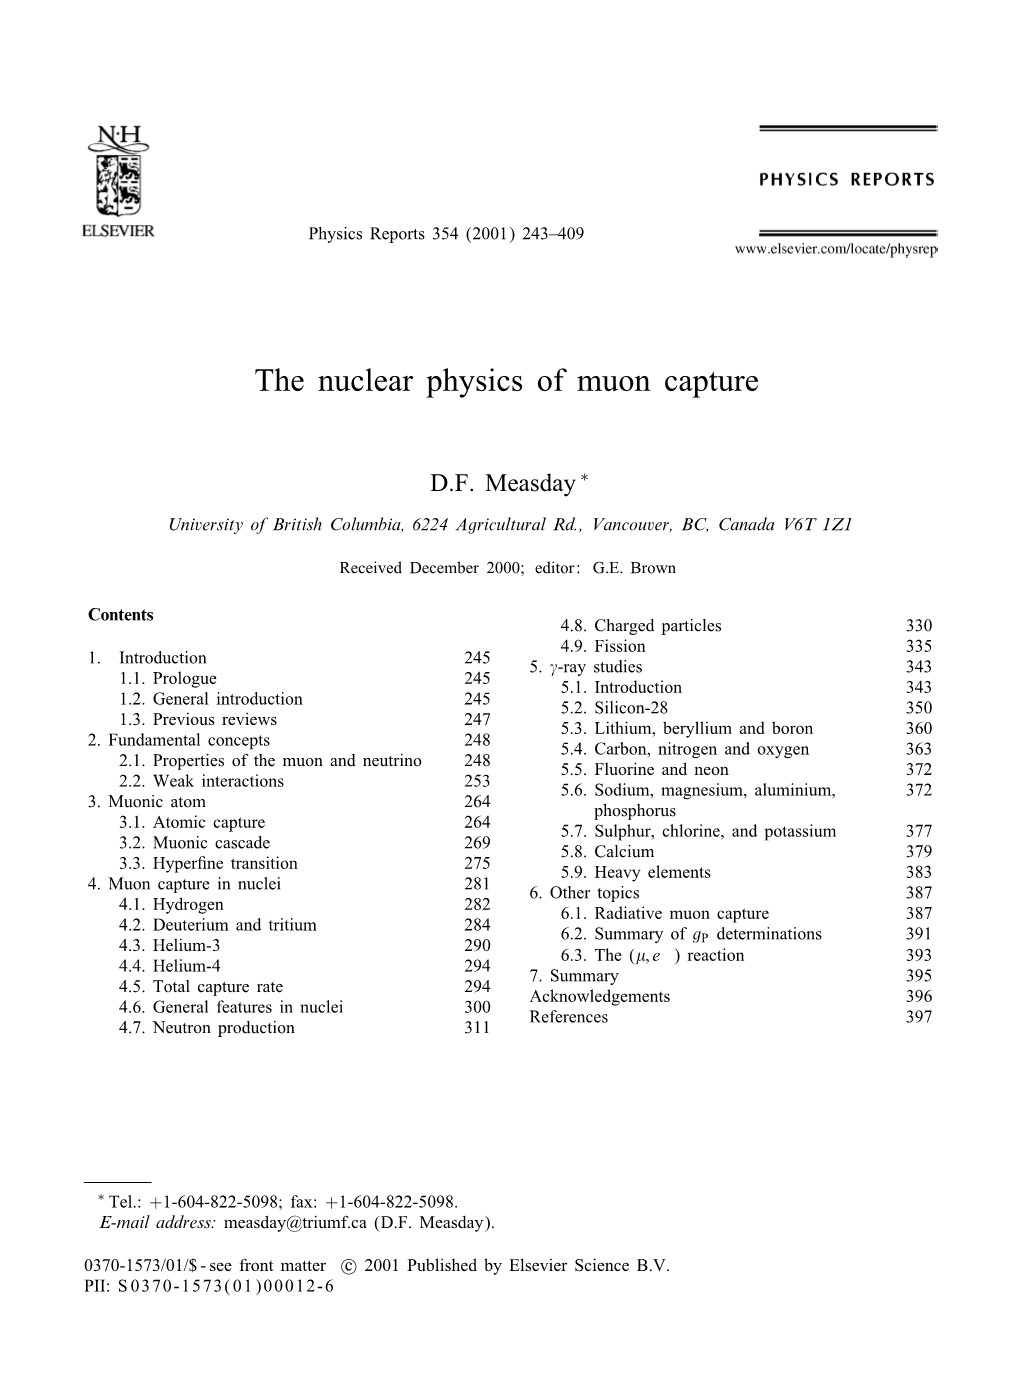 The Nuclear Physics of Muon Capture